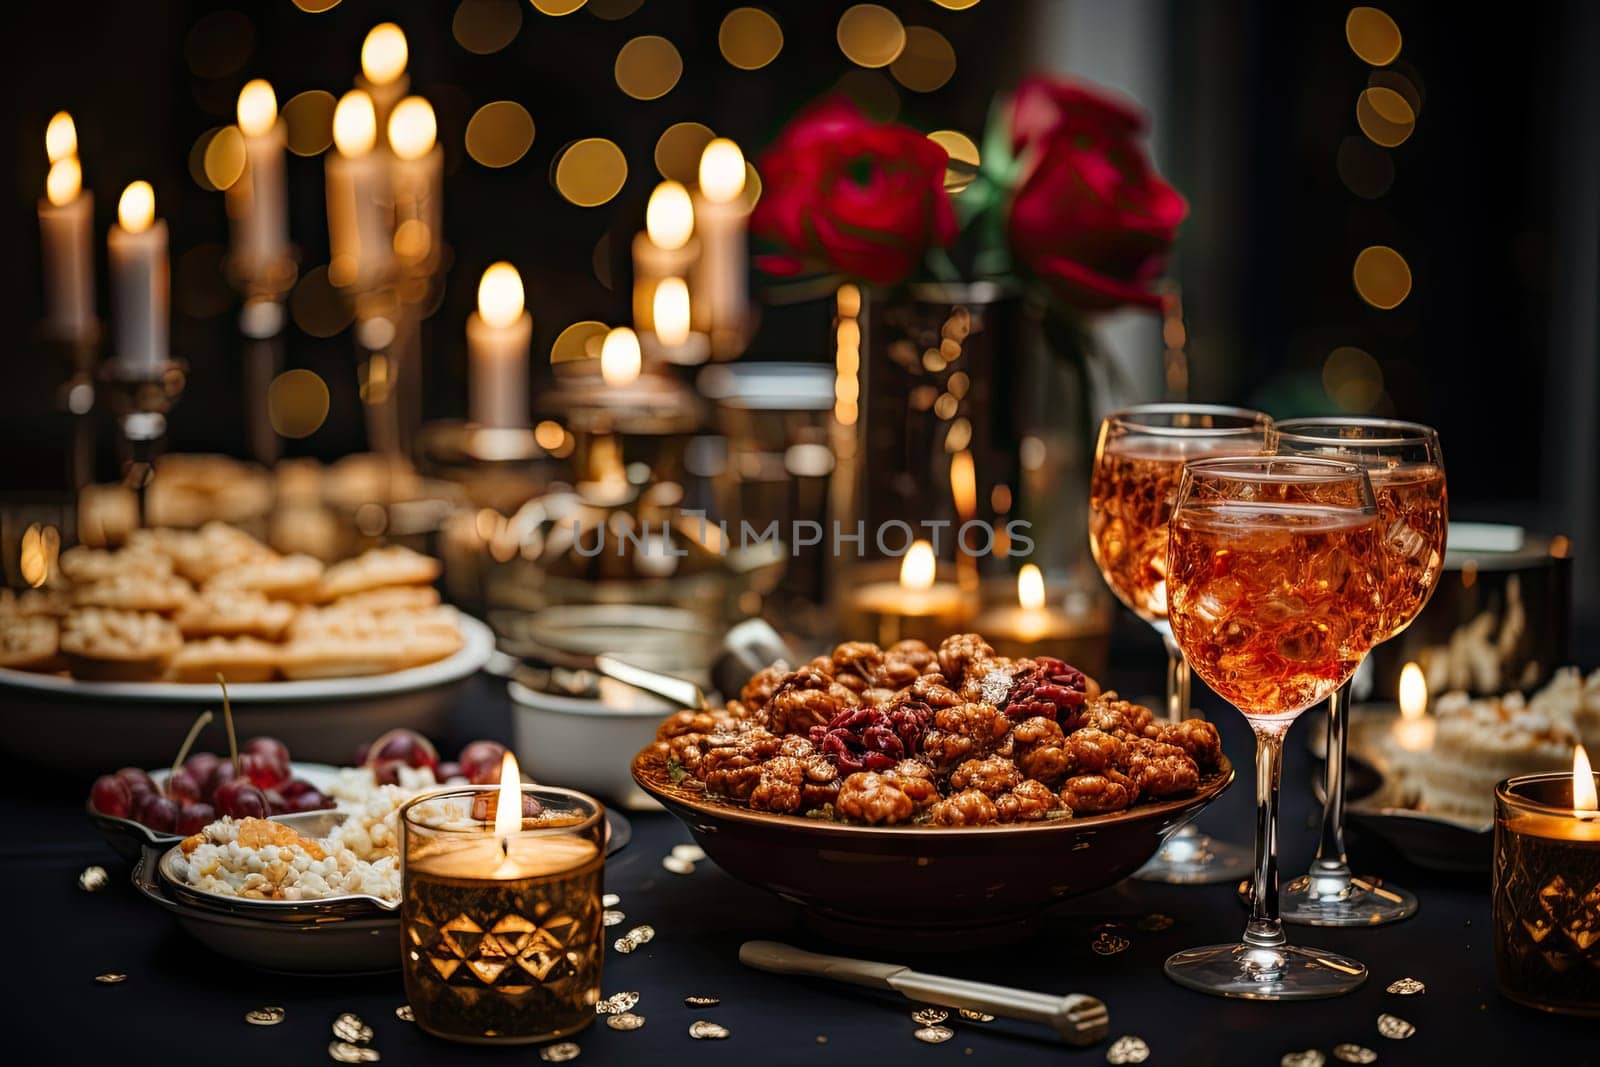 A Feast of Delicious Delights Illuminated by Candlelight